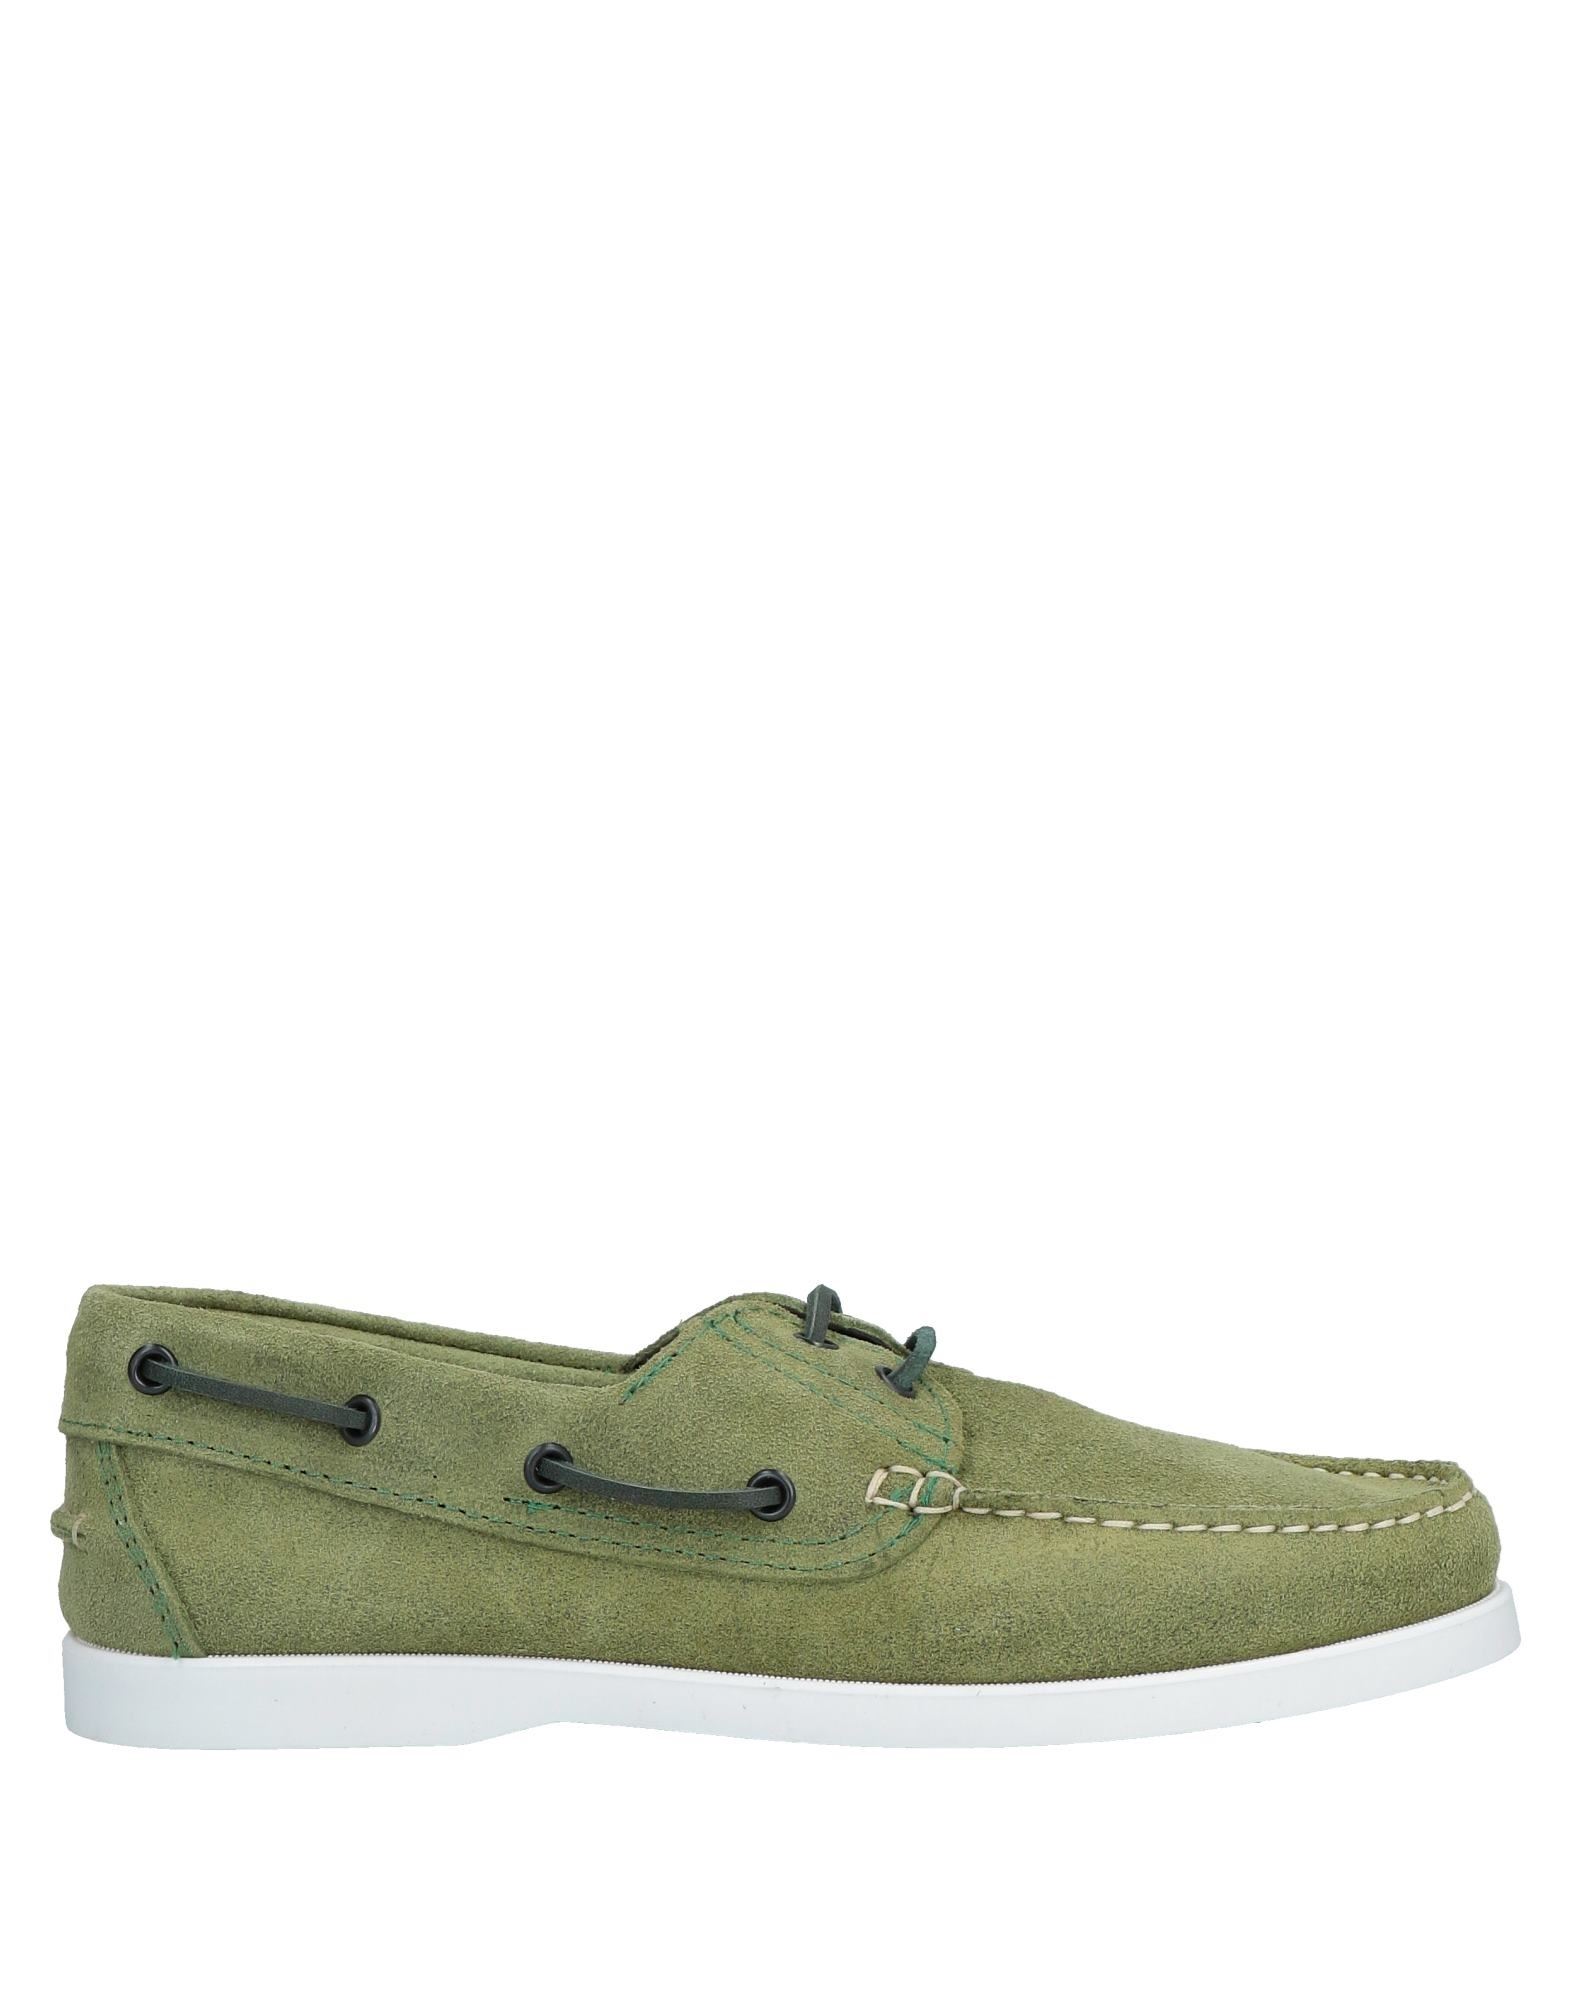 Angelo Pallotta Loafers In Sage Green